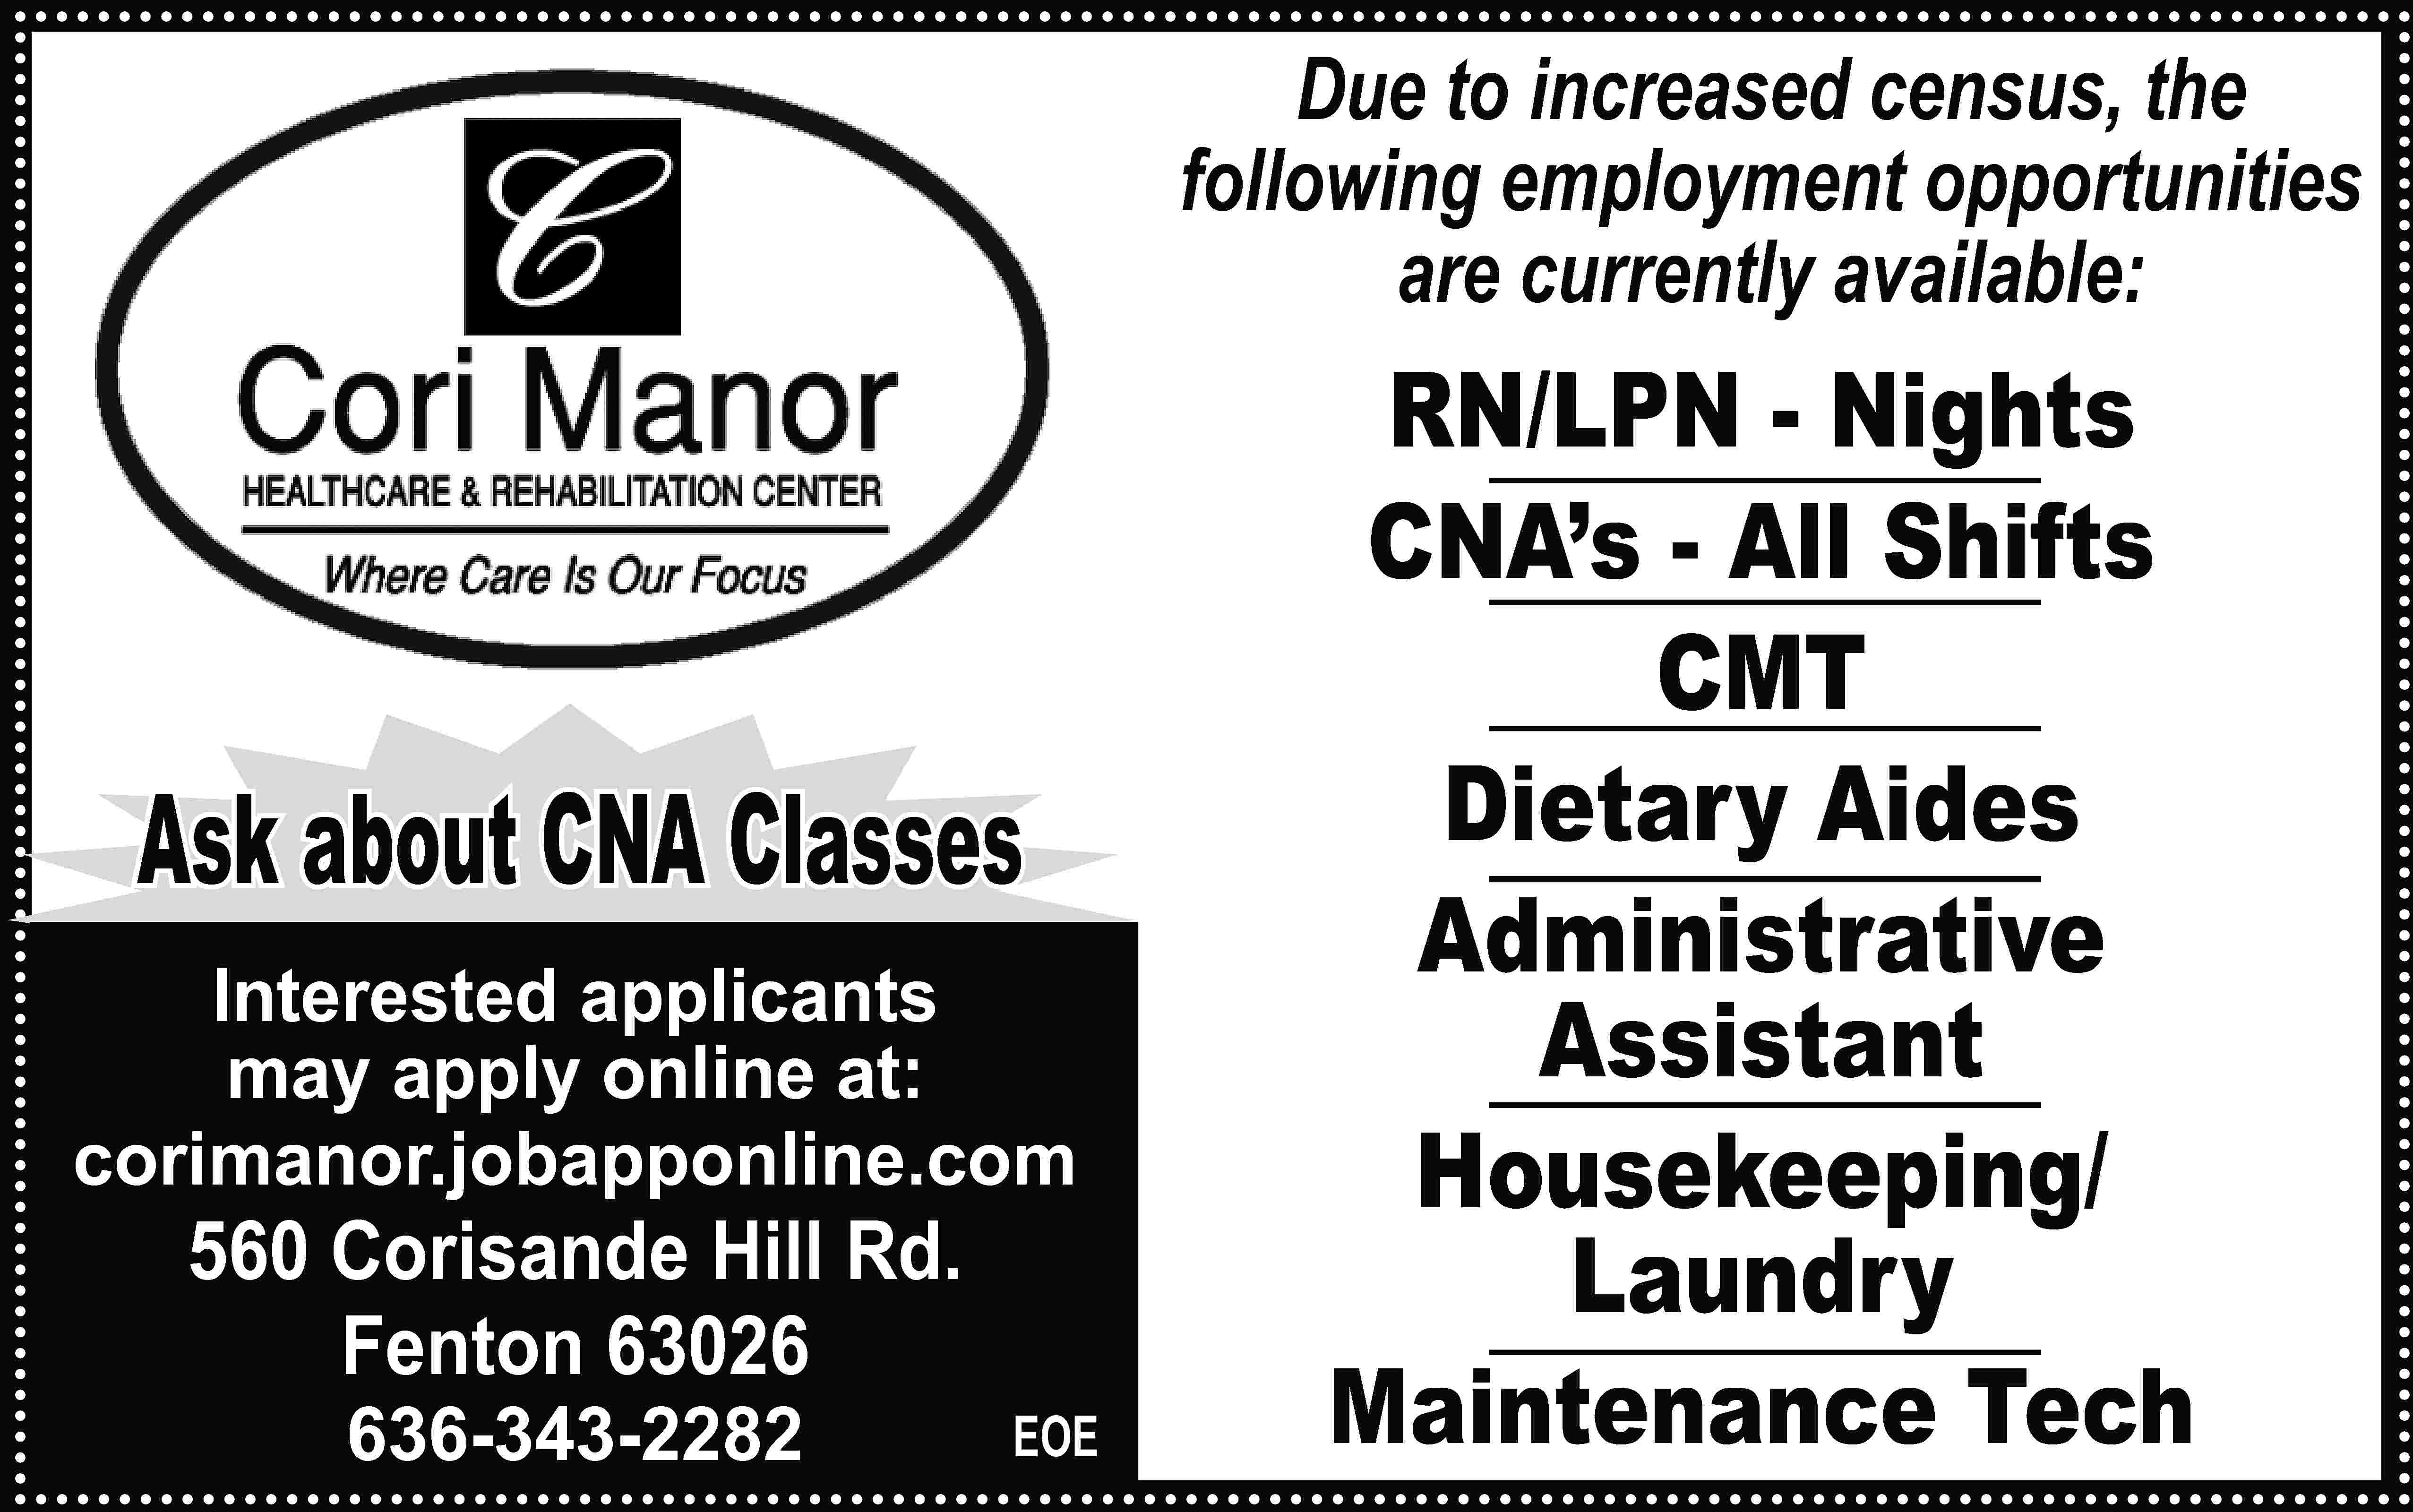 Due to increased census, the  Due to increased census, the following employment opportunities are currently available: Ask about CNA Classes Interested applicants may apply online at: corimanor.jobapponline.com 560 Corisande Hill Rd. Fenton 63026 636-343-2282 EOE RN/LPN - Nights CNA’s - All Shifts CMT Dietary Aides Administrative Assistant Housekeeping/ Laundry Maintenance Tech